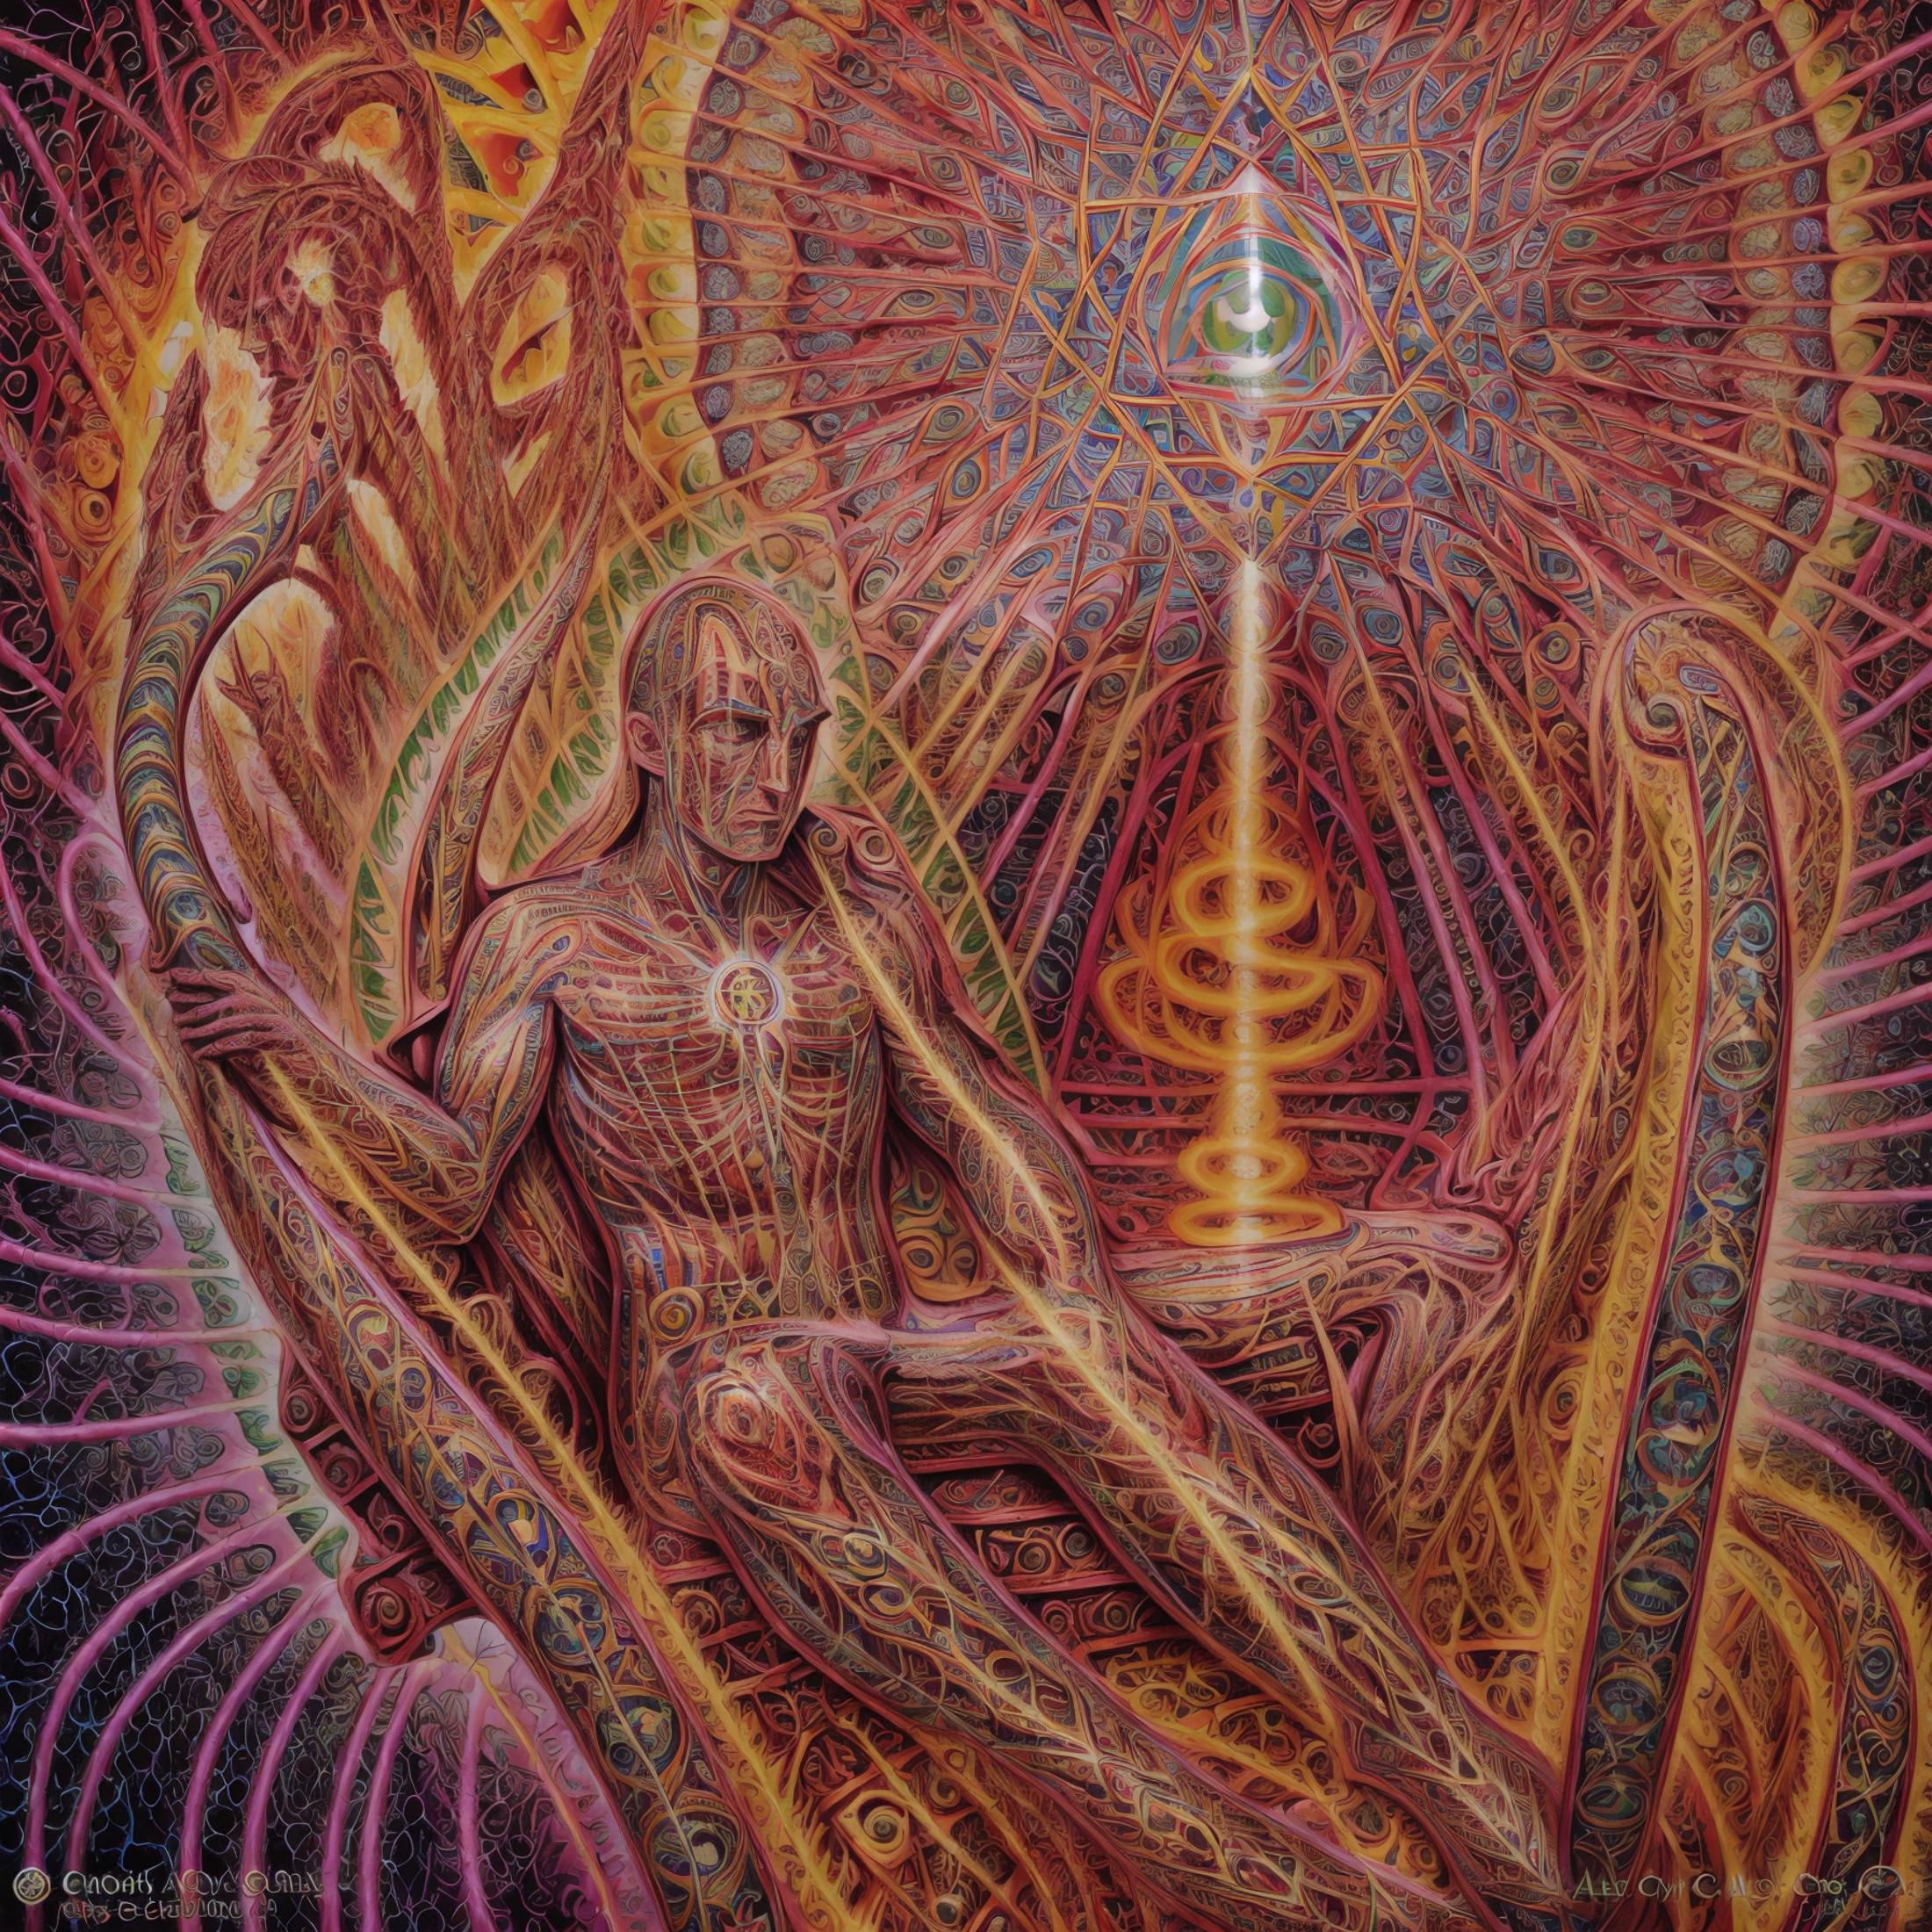 Alex Grey style art (SD 1.5) image by getphat